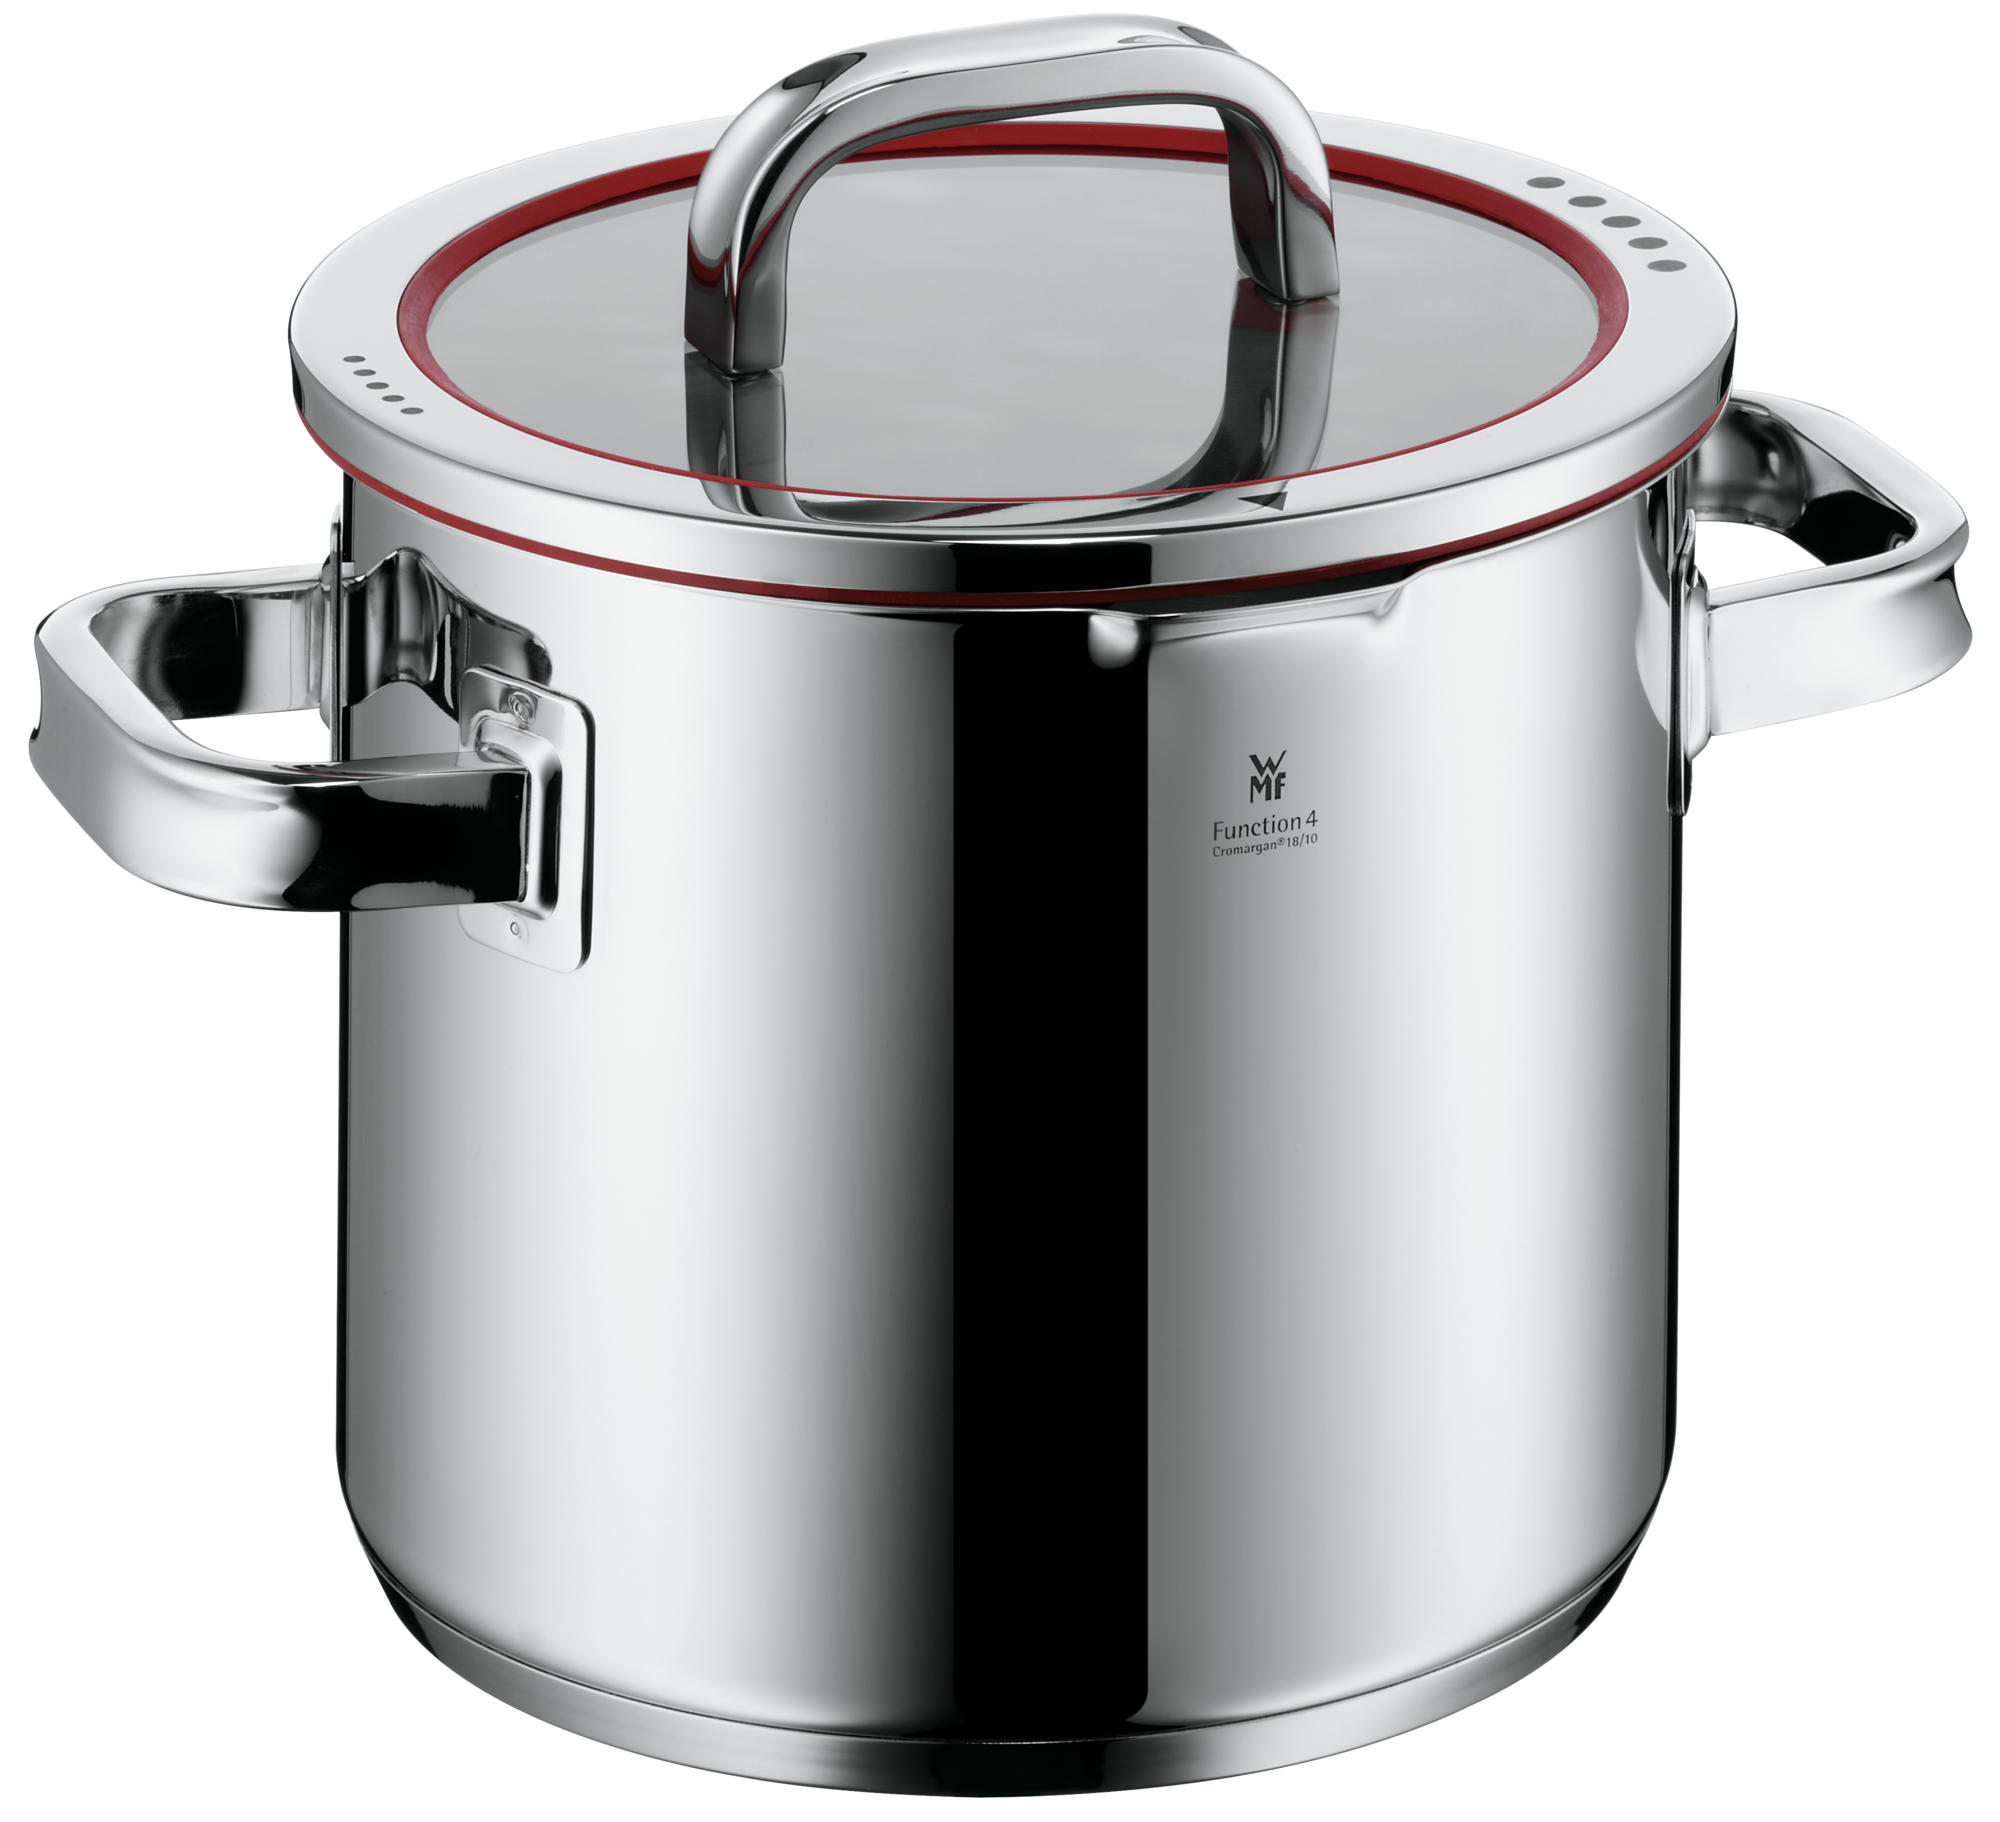 20cm Diameter Stainless Steel Soup Pot With Lid